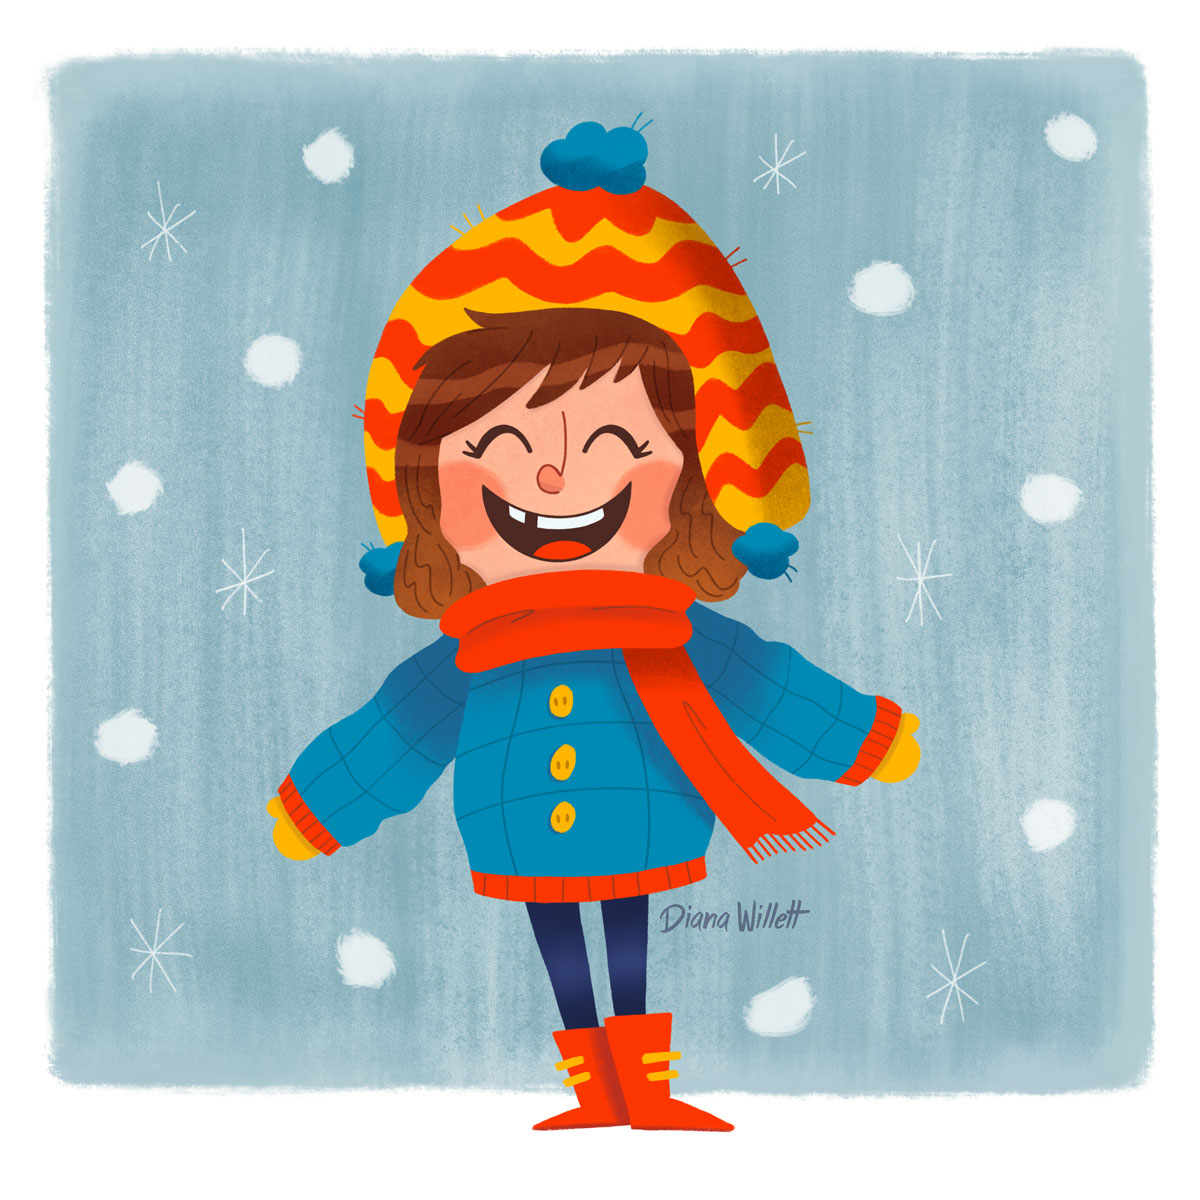 Kidlit Illustration by Diana Willett. girl happy with the snow while wearing a heavy coat, scarf, and knit hat.